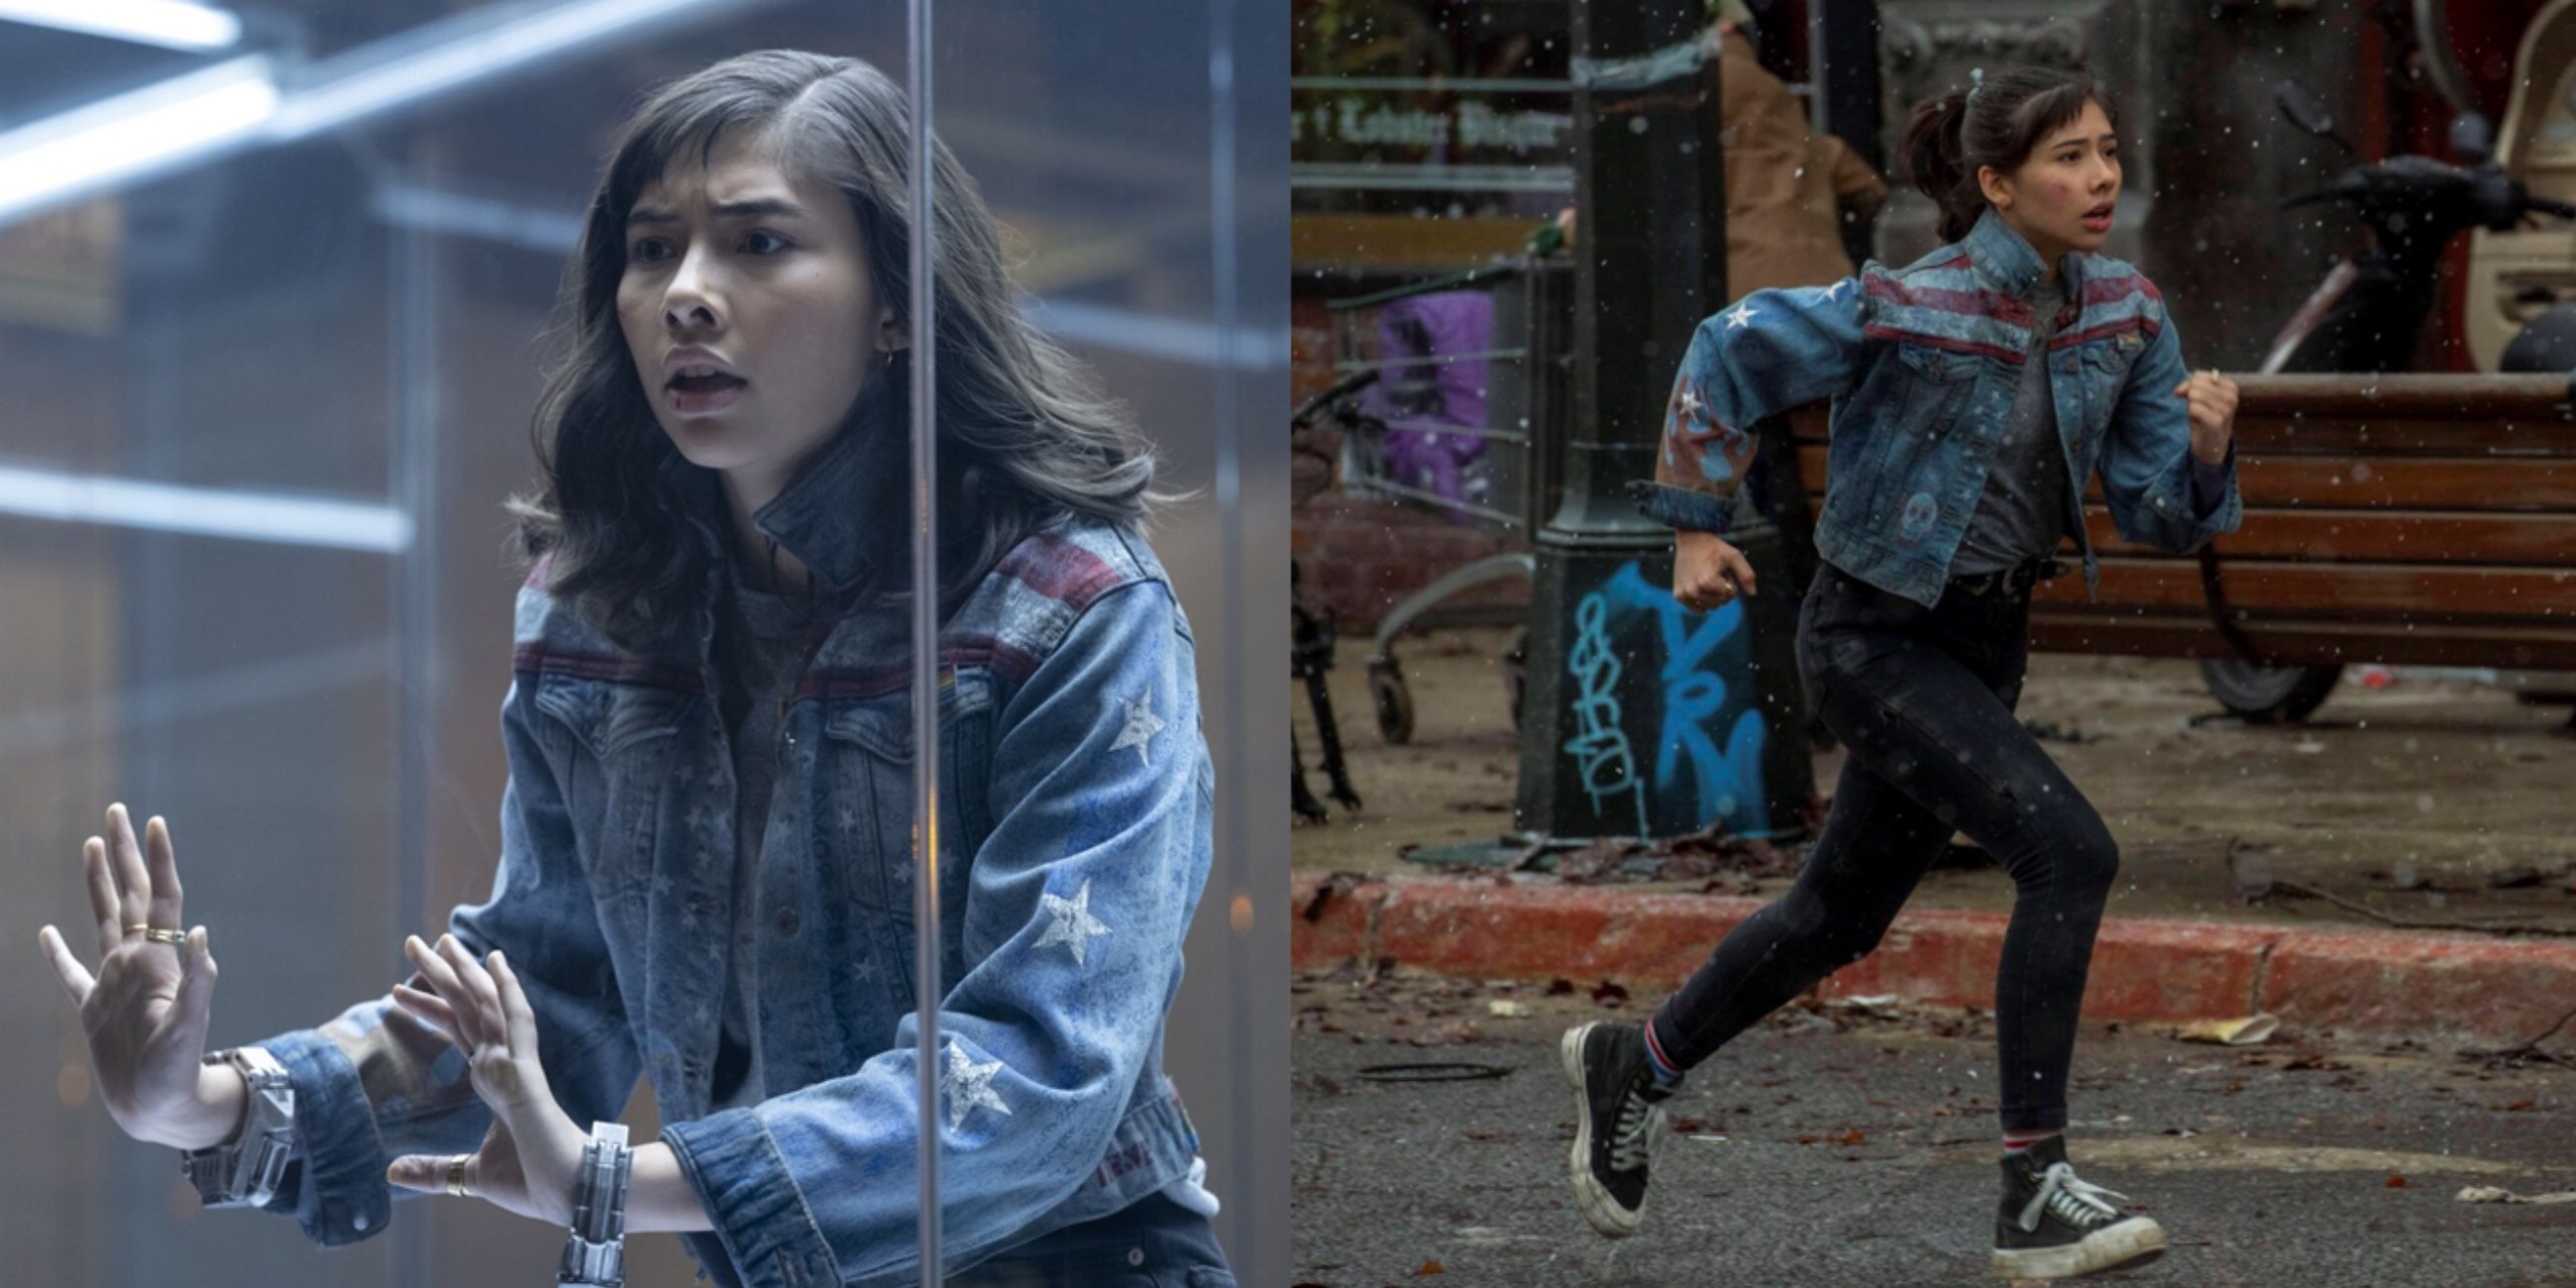 Split image of America Chavez in a jail cell and running on the street in Doctor Strange 2